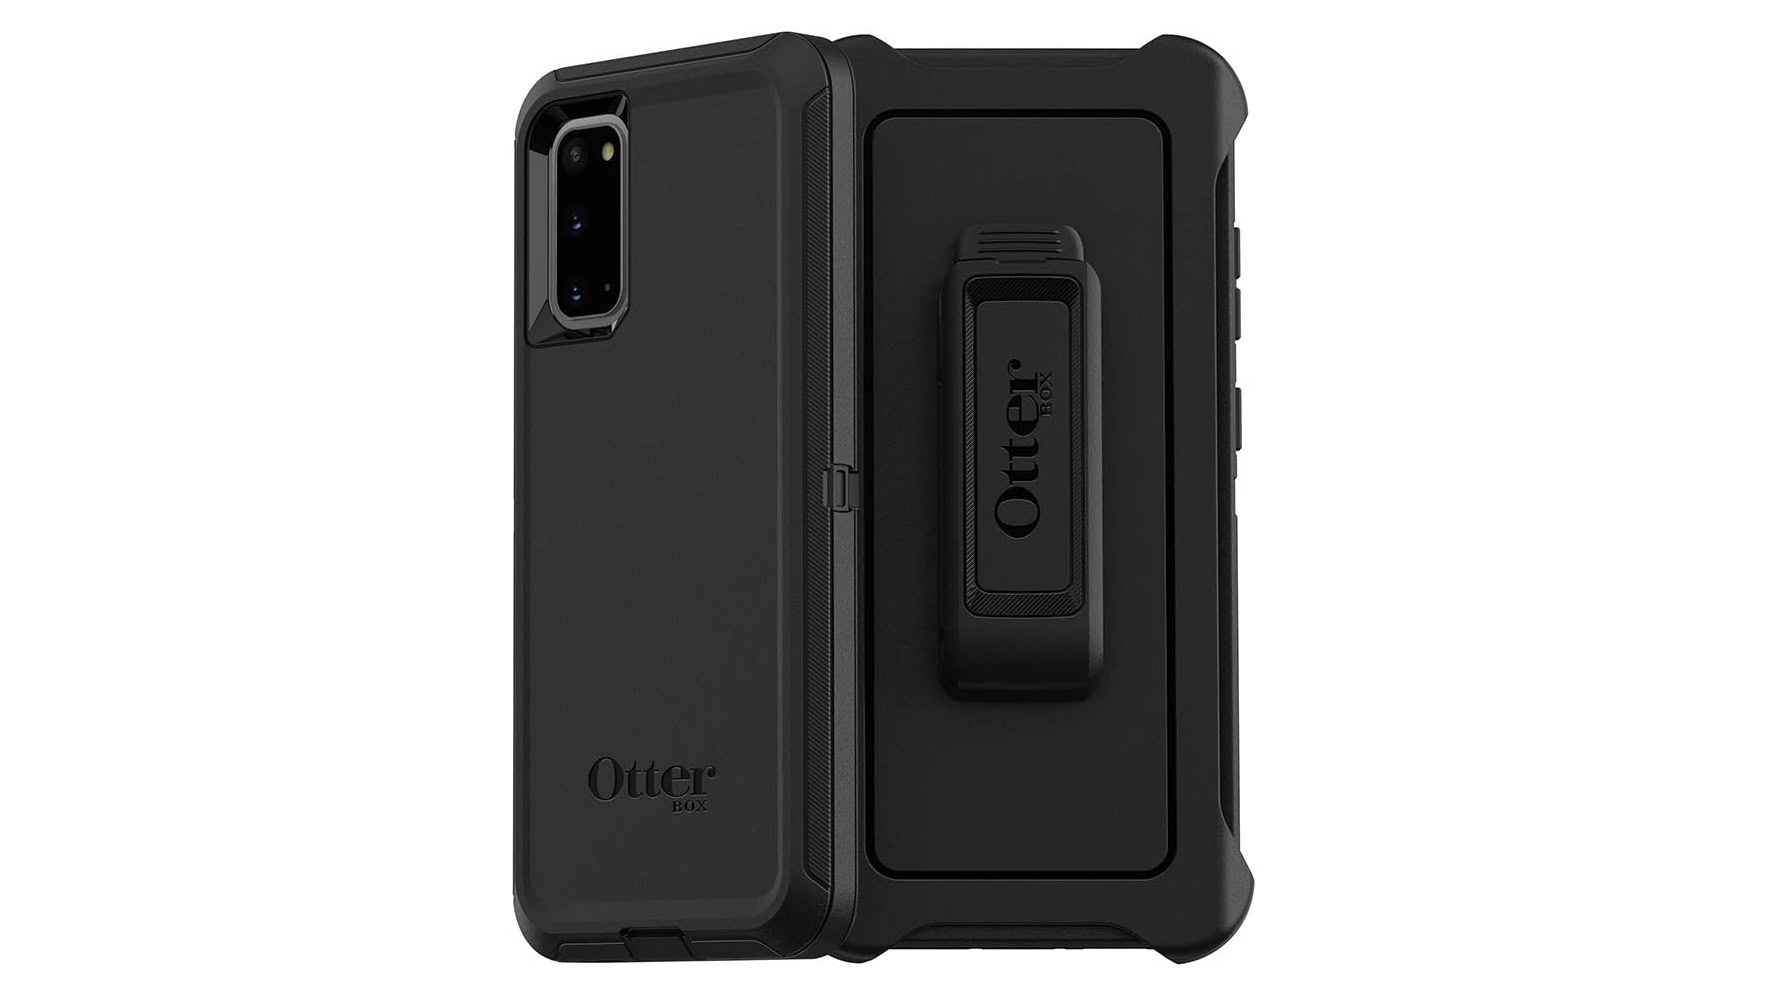 Otterbox Defender screenless edition